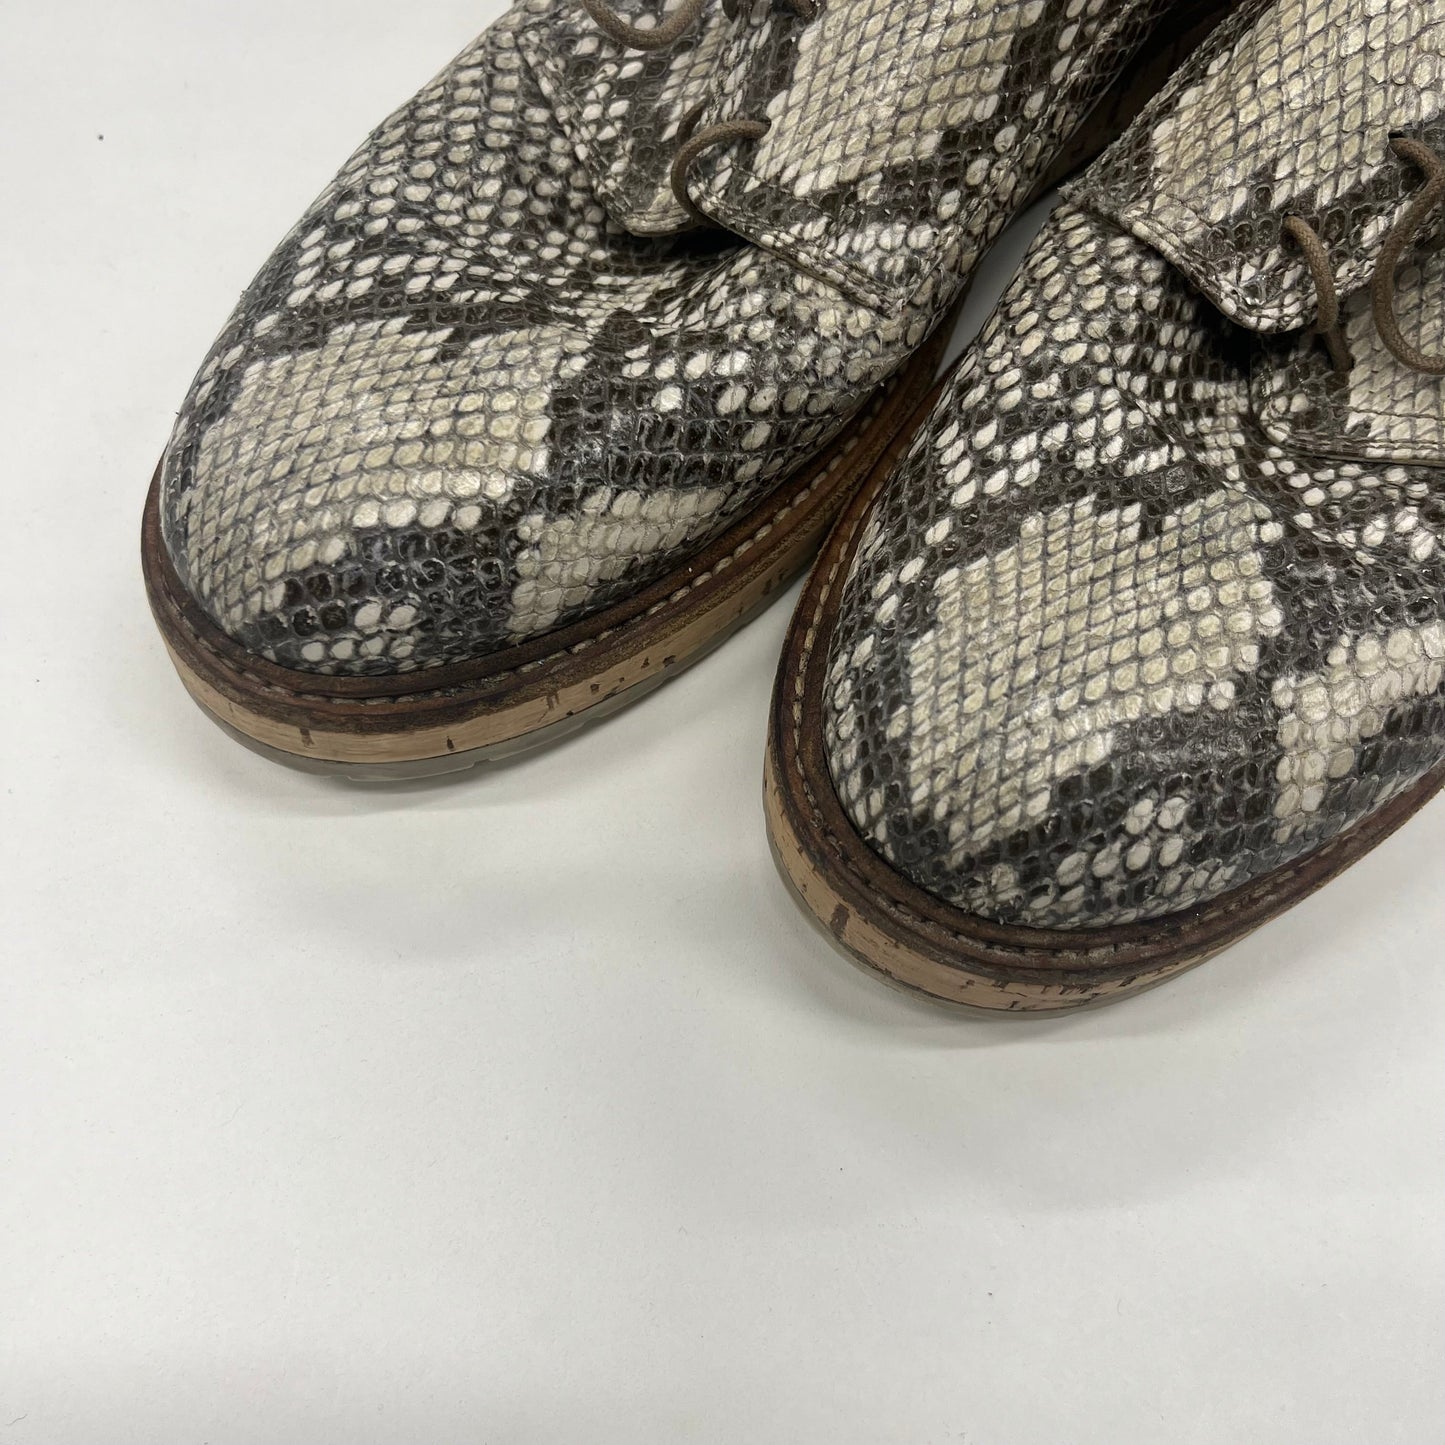 Animal Print Shoes Flats Loafer Oxford Agl, Size 9.5